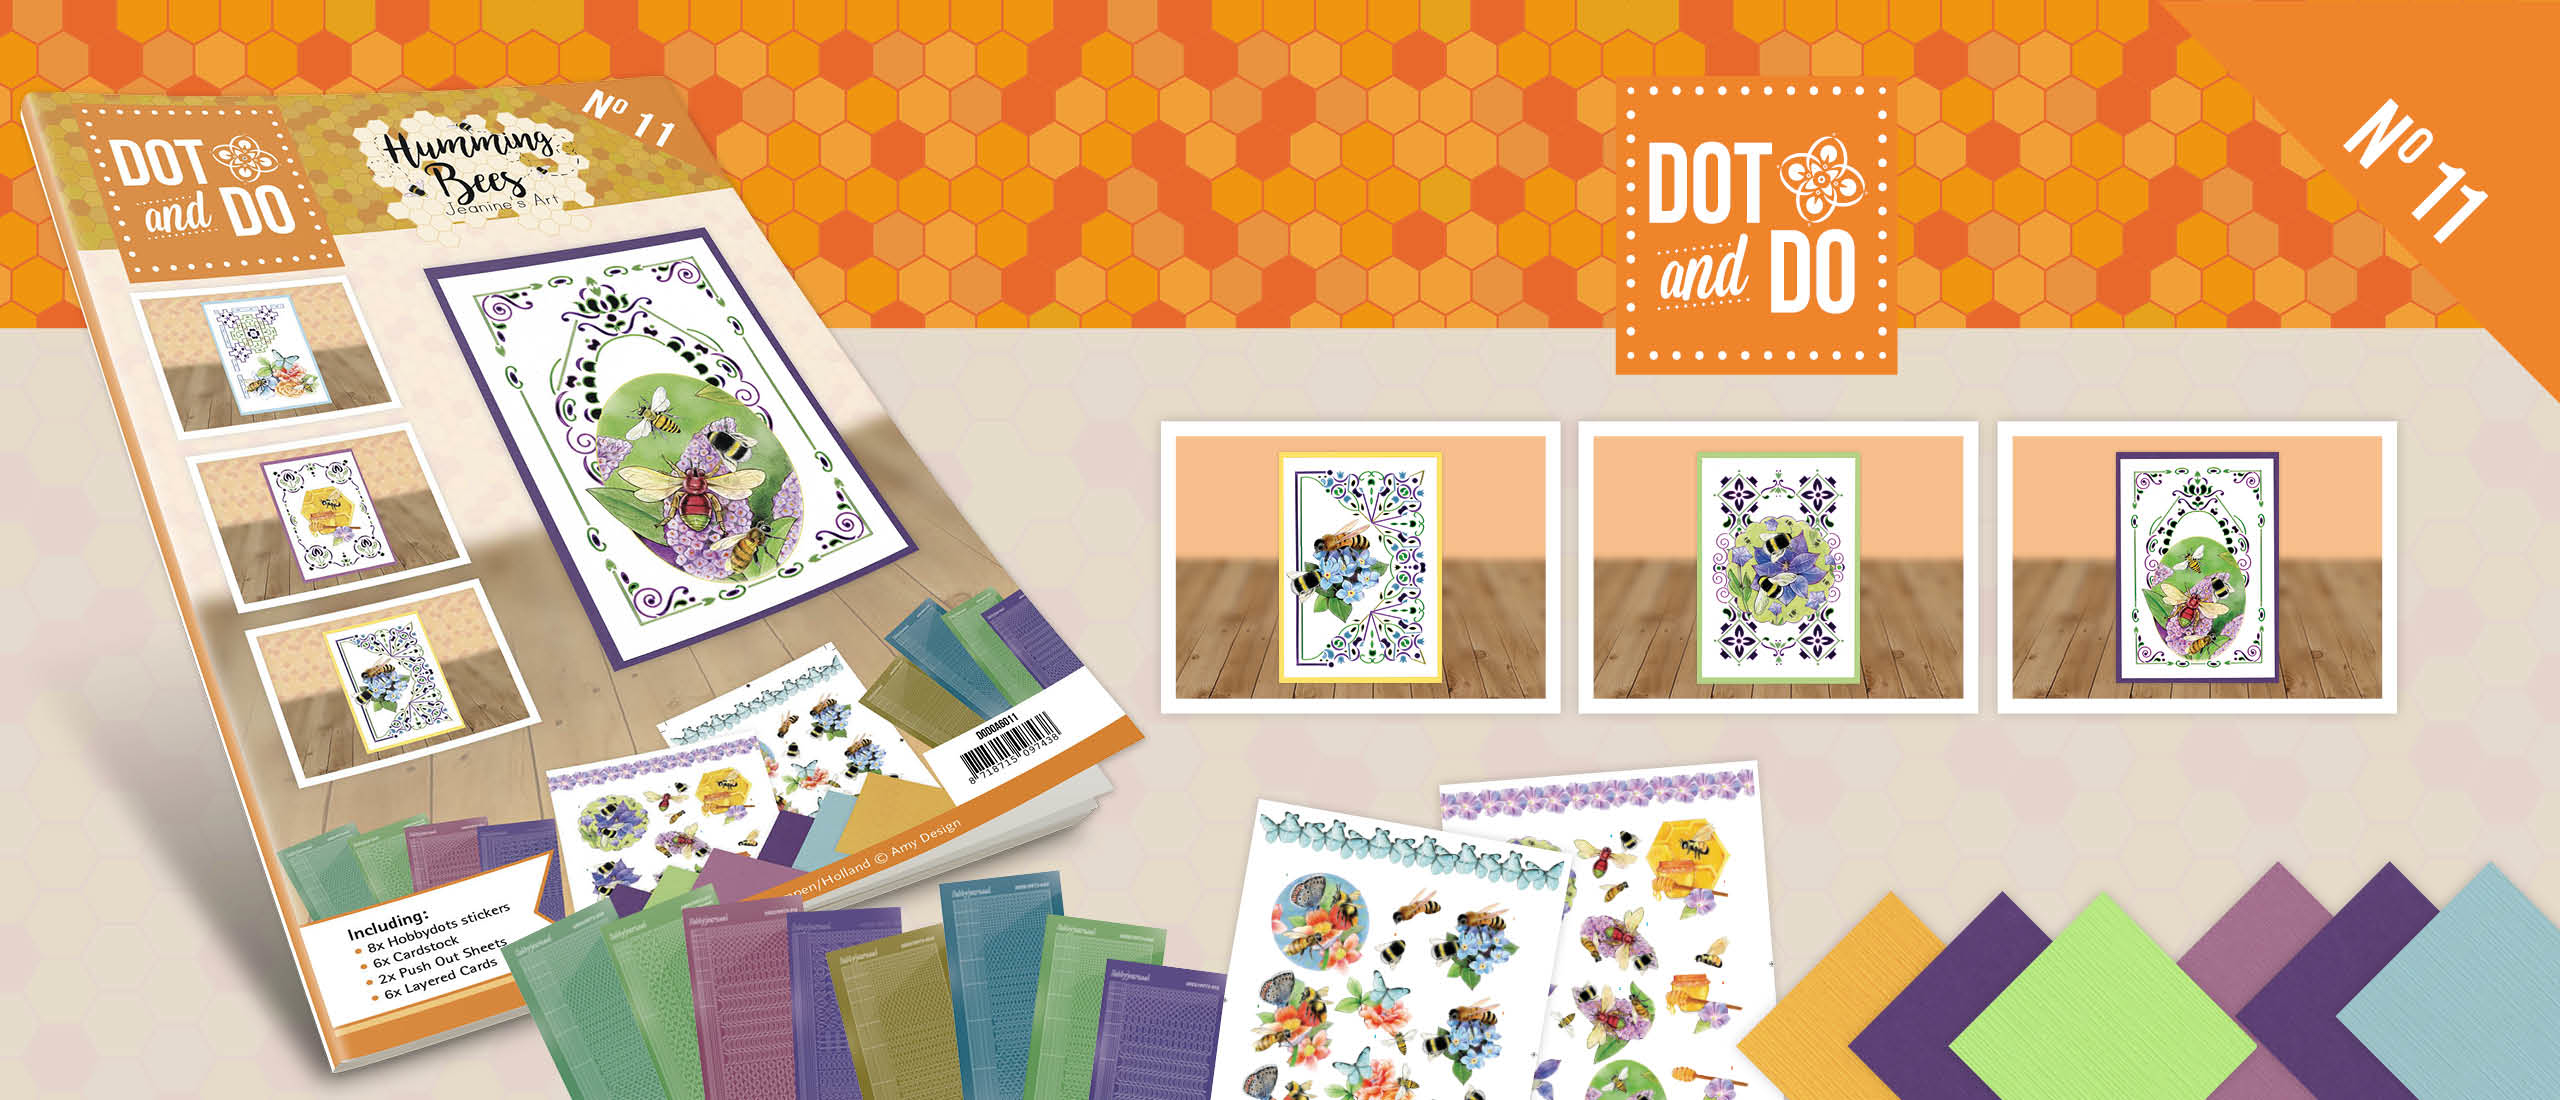 Dot and Do Book 11- Jeanine's Art - Humming bees DODOA6011